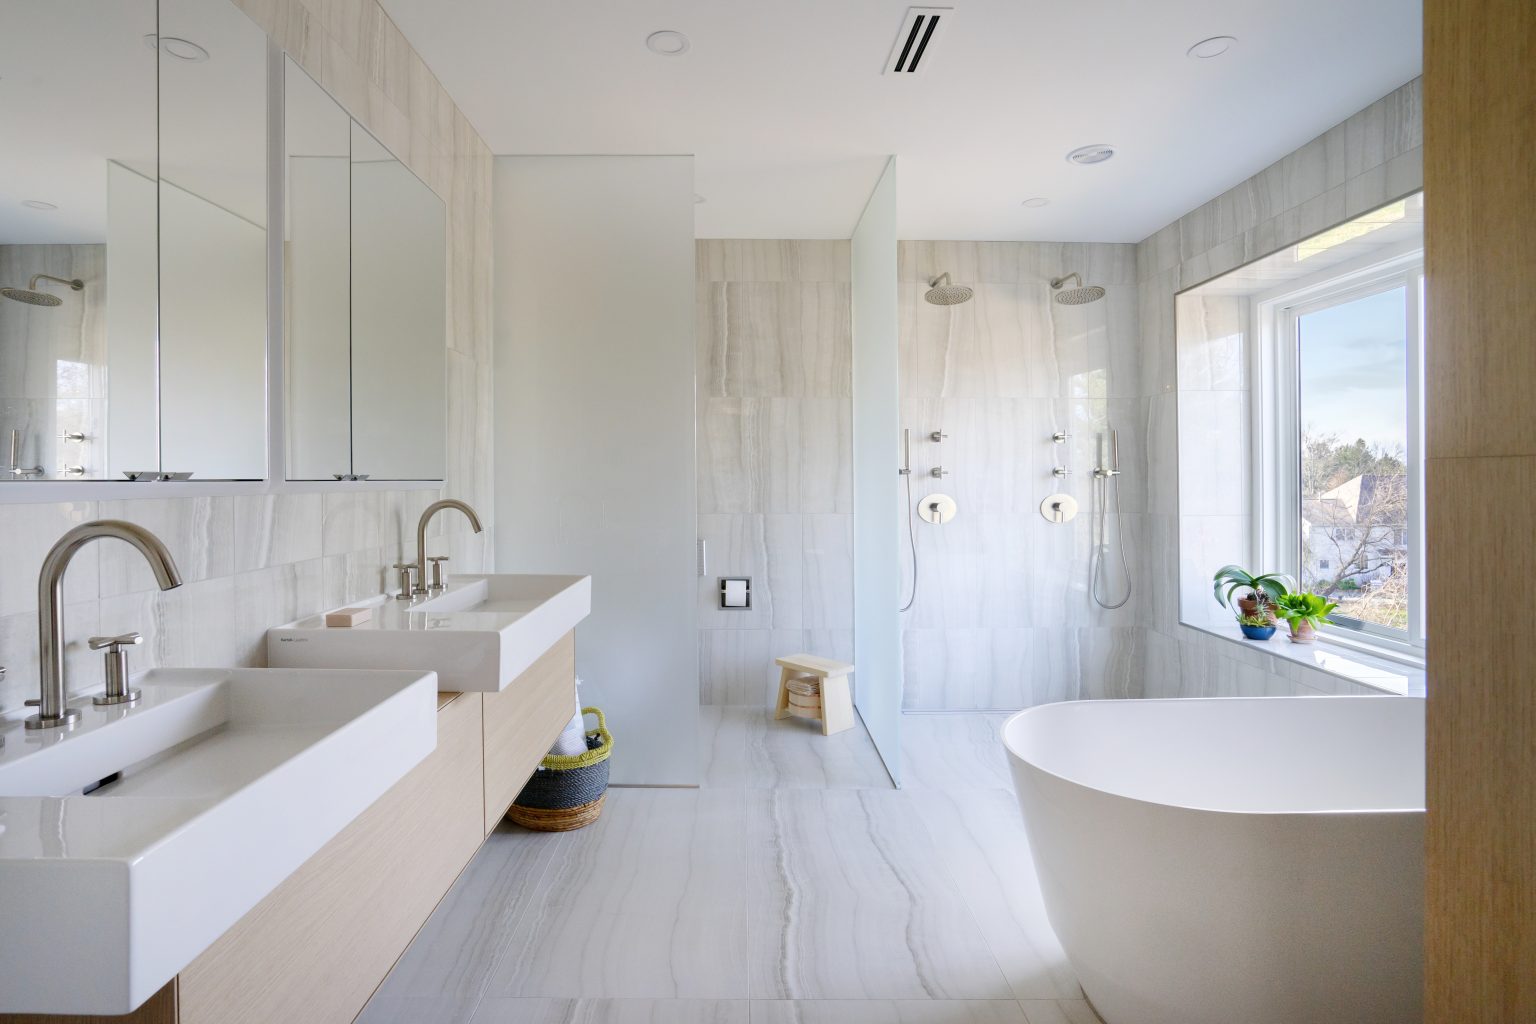 Collaboration Gives Birth to Creative Design - Bathroom Remodel Project ...